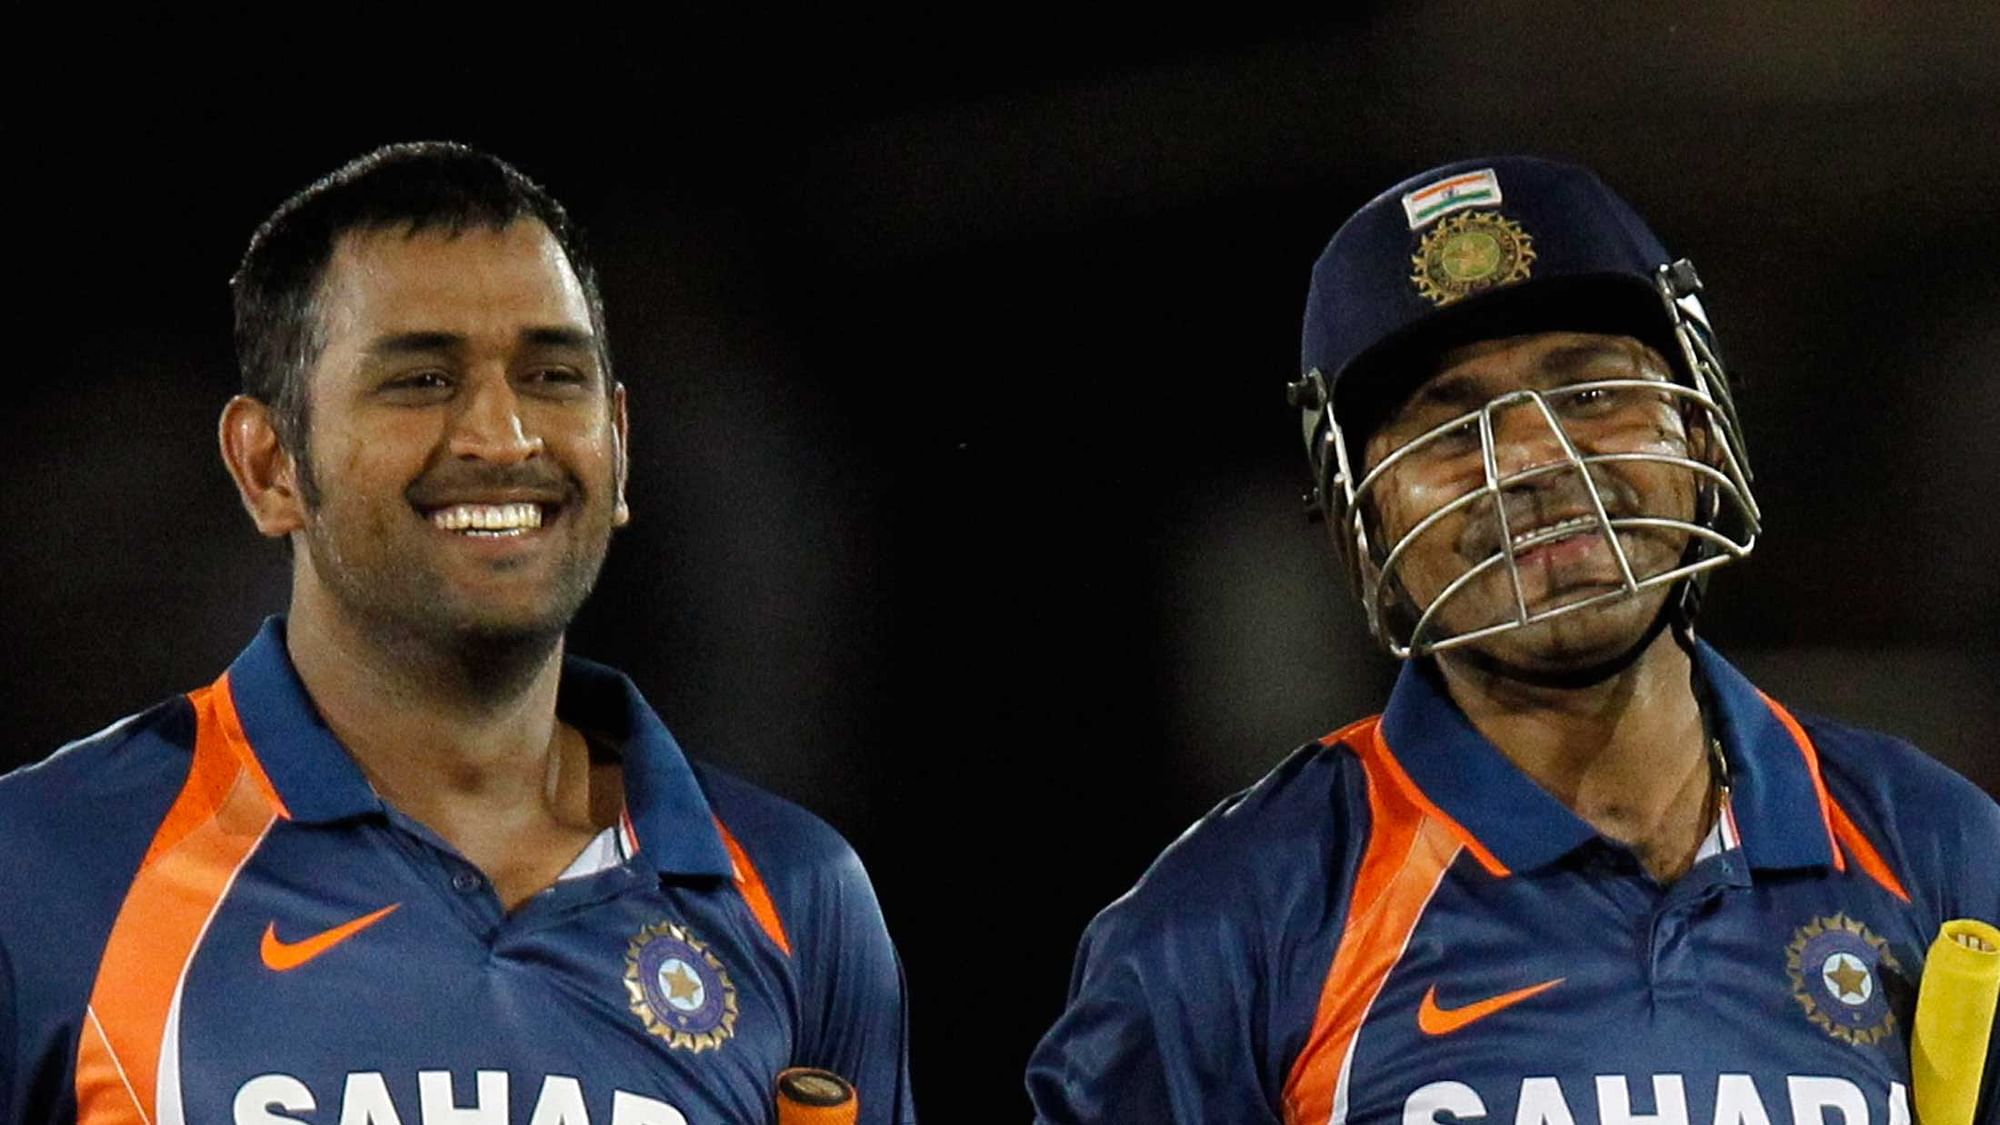 Virender Sehwag and captain Mahendra Singh Dhoni during a match for India in 2010.